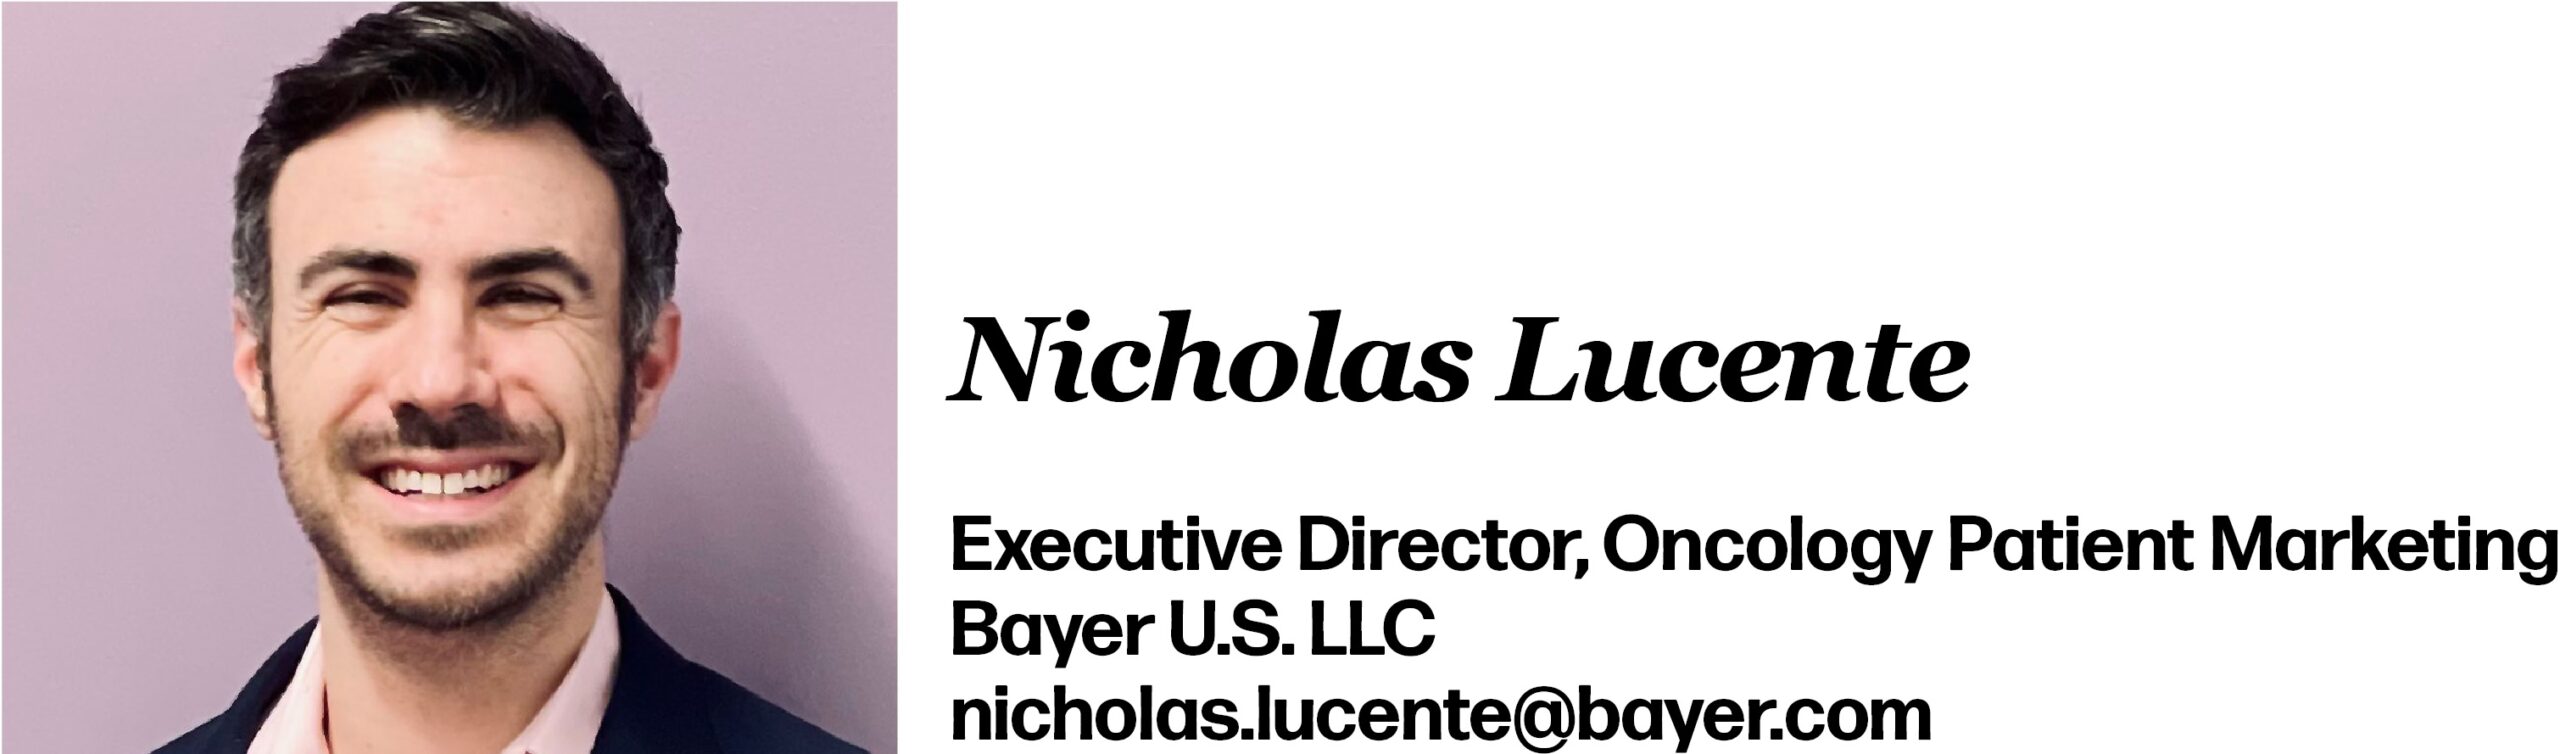 Nicholas Lucente is Executive Director, Oncology Patient Marketing at Bayer U.S. LLC. His email is nicholas.lucente@bayer.com.